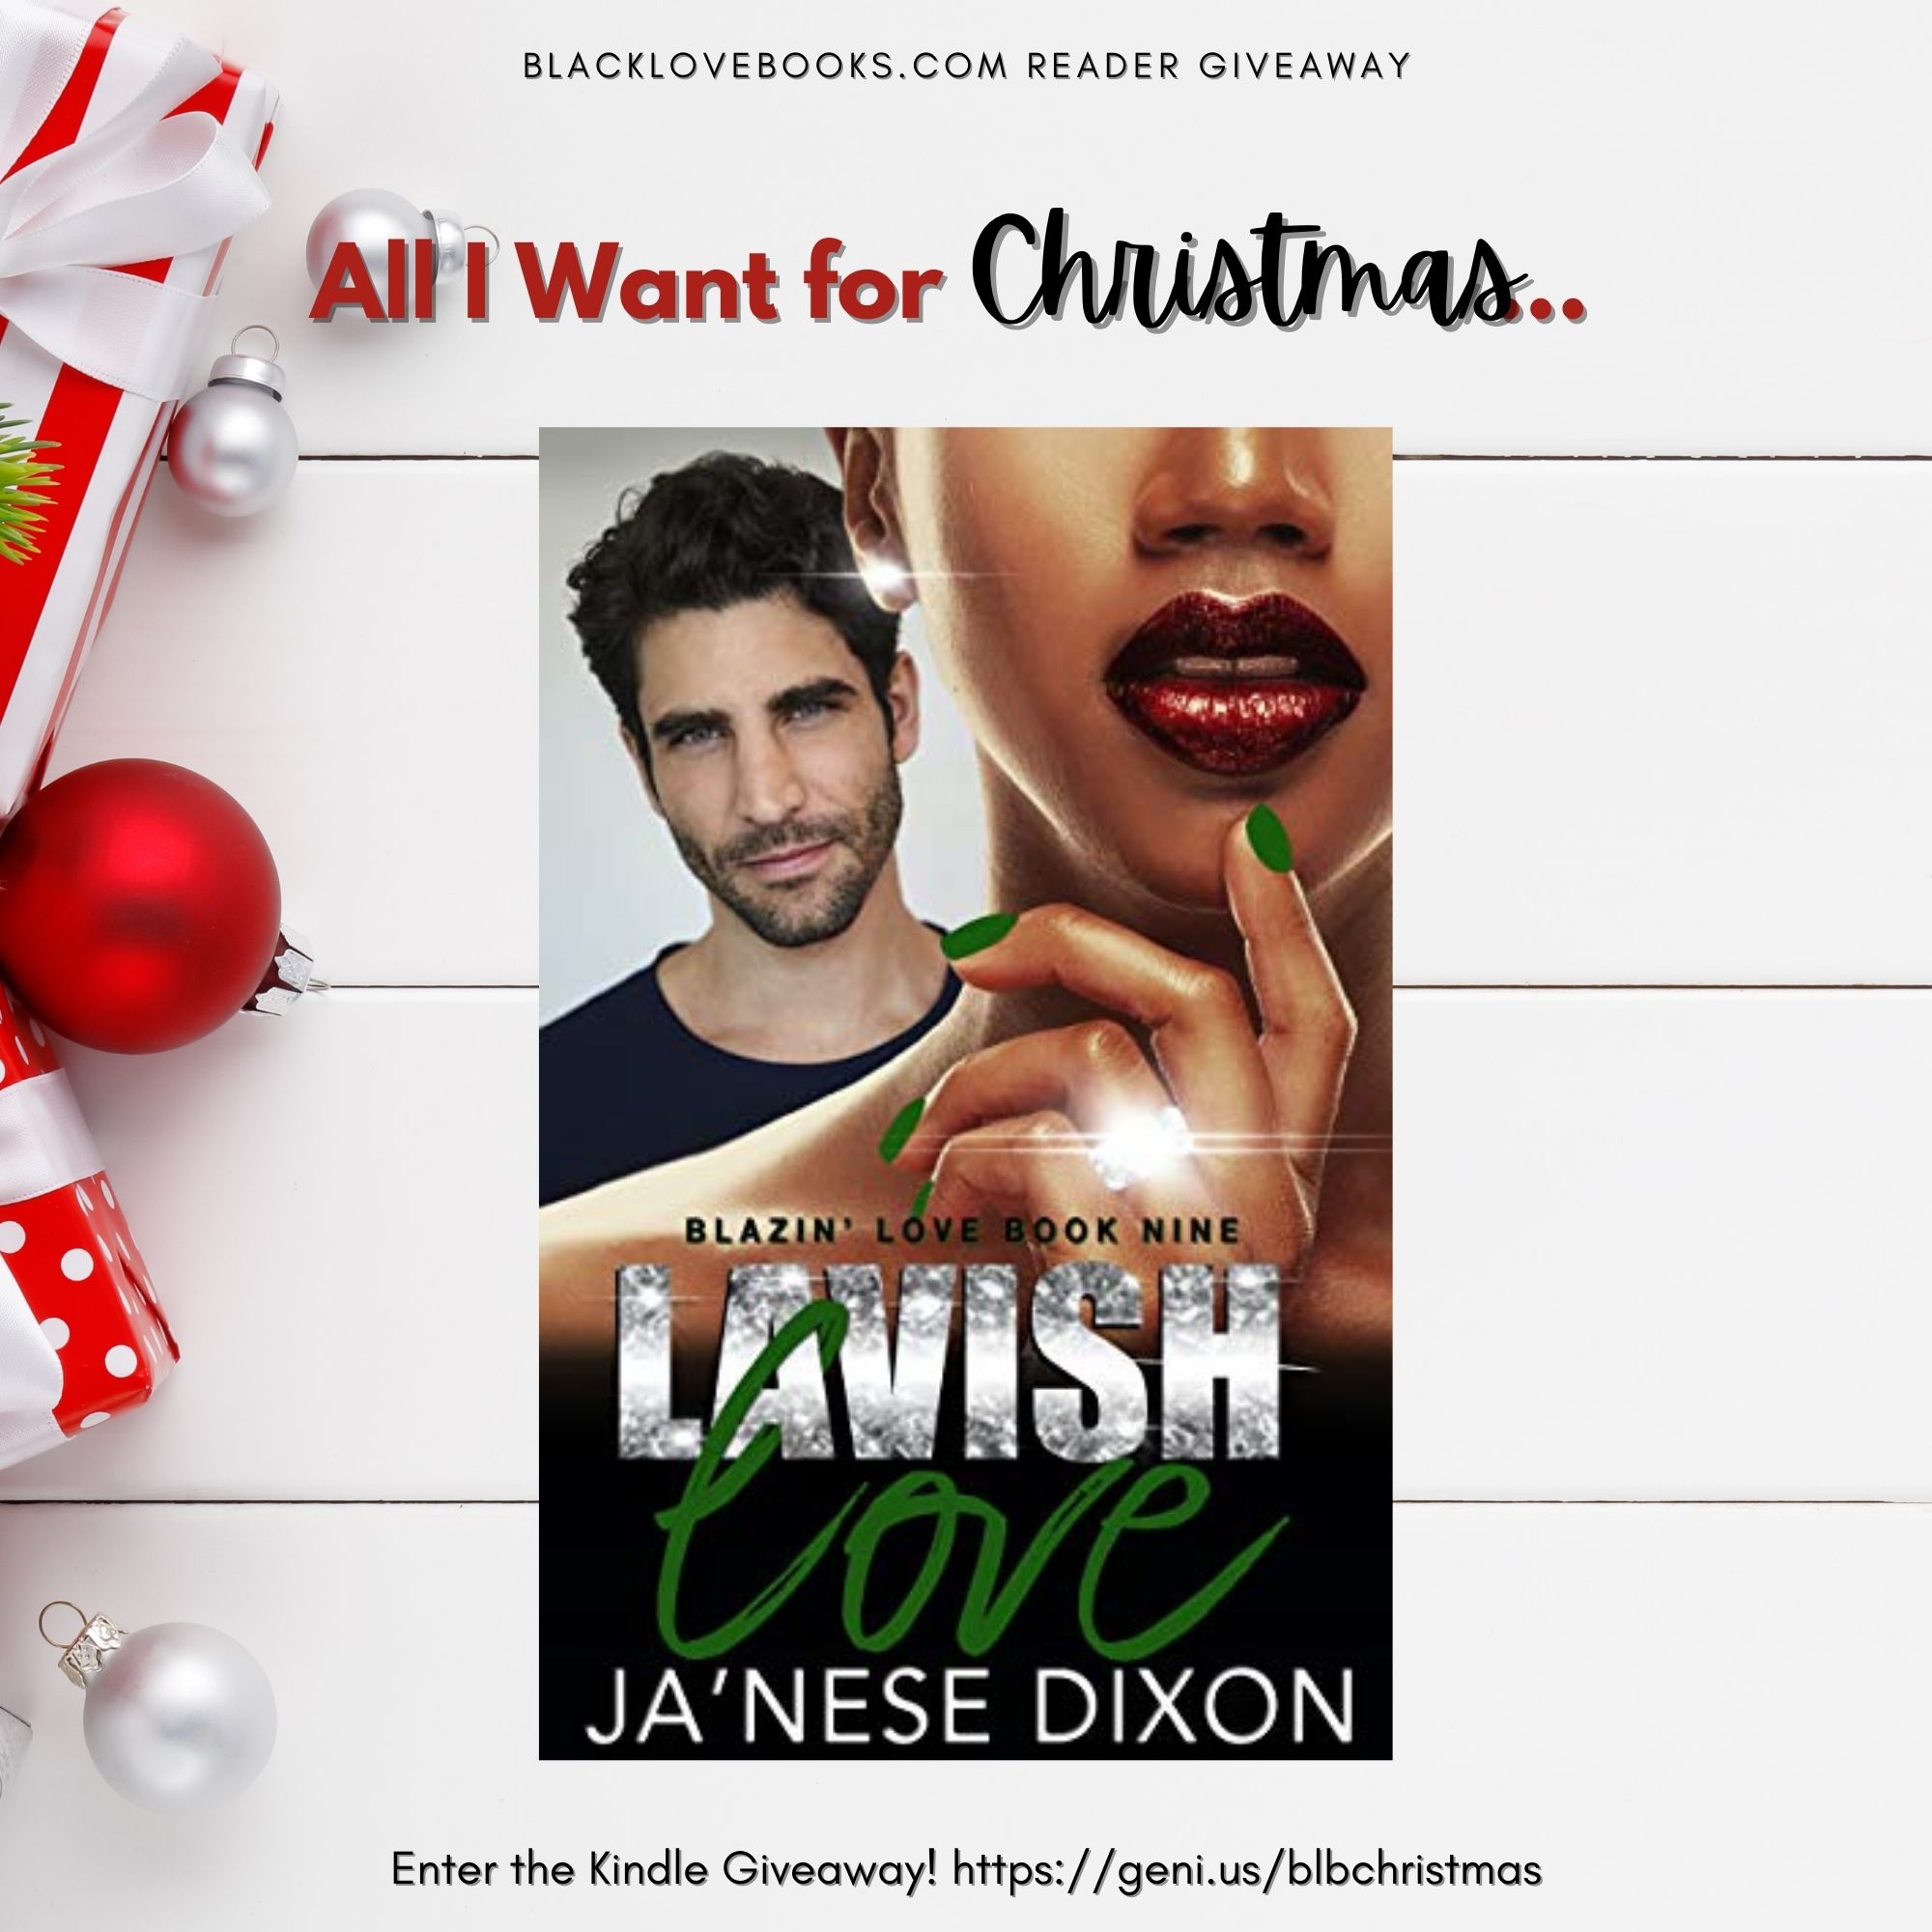 All I Want for Christmas is… Lavish Love by Ja’Nese Dixon